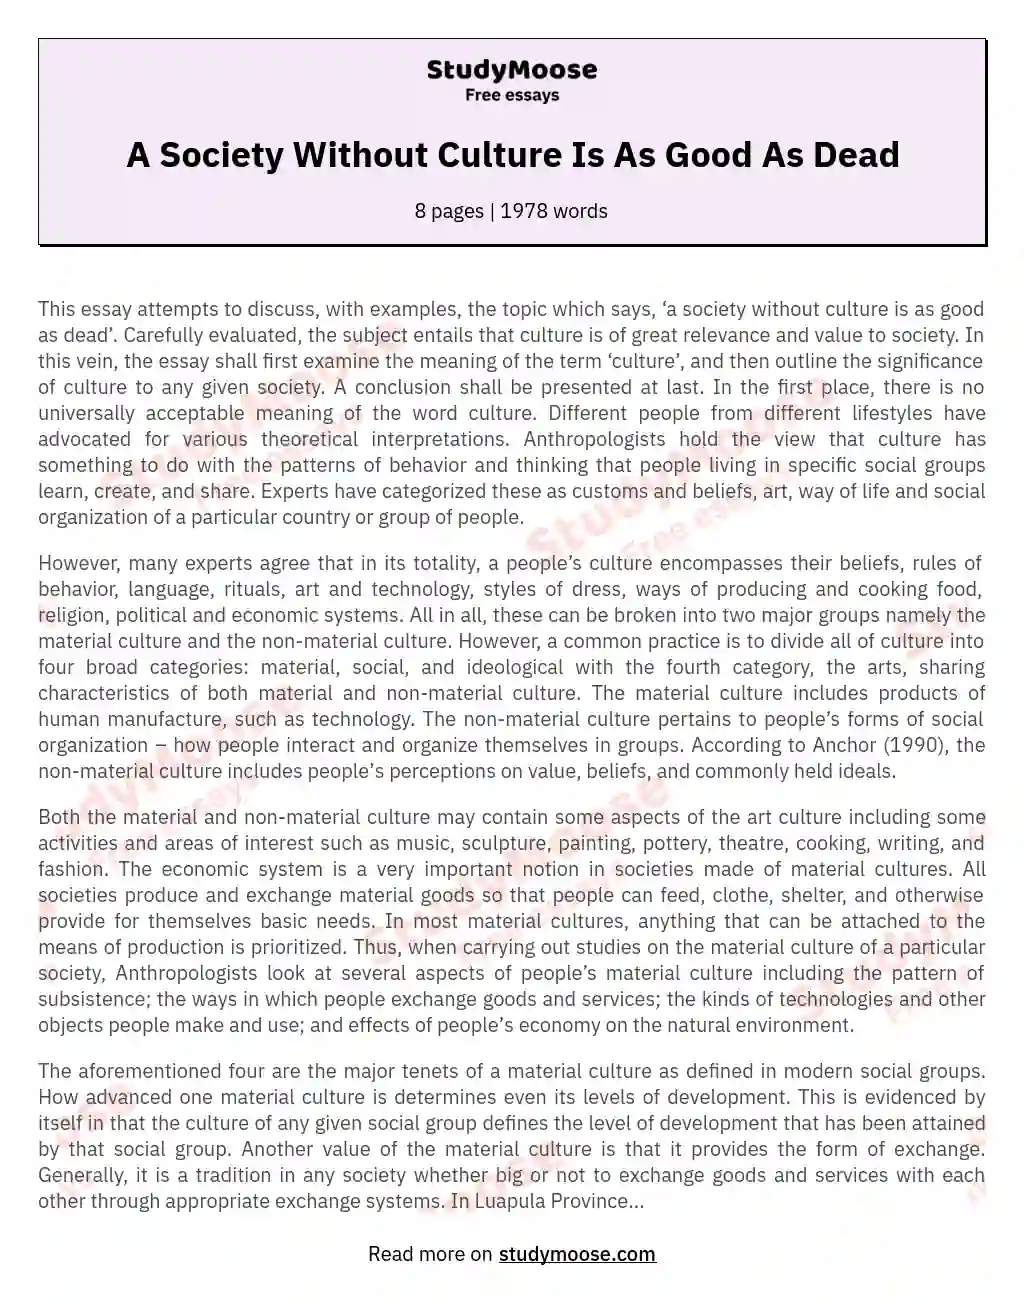 A Society Without Culture Is As Good As Dead essay